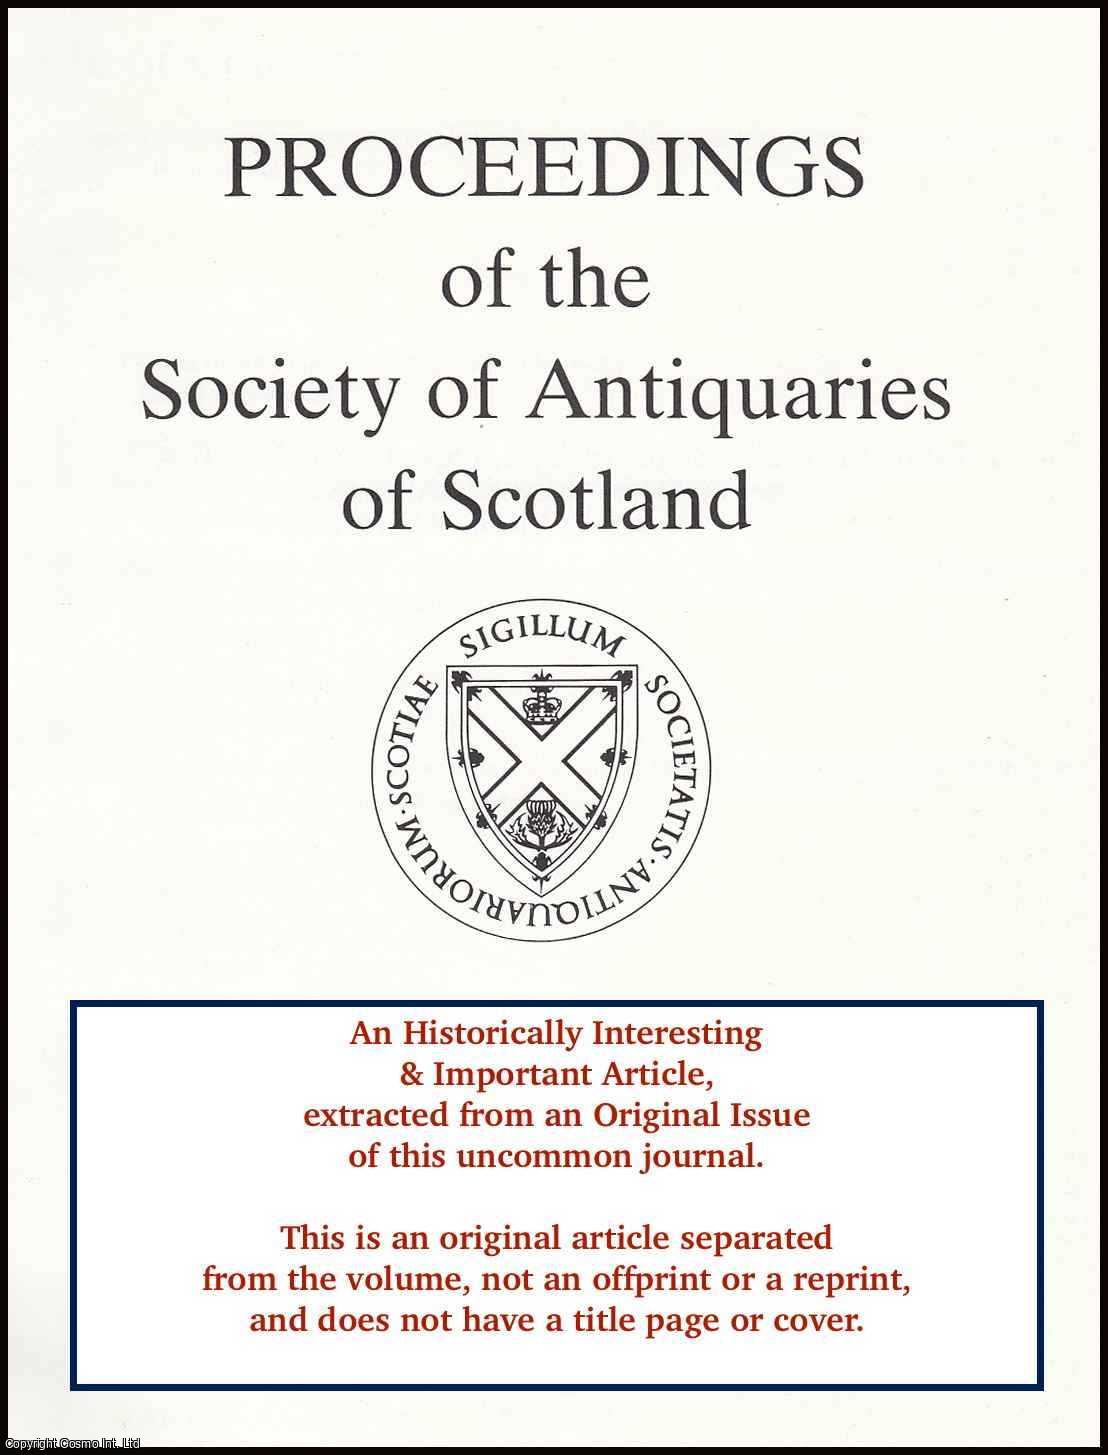 David Perry - Inverness: An Historical and Archaeological Review. An original article from the Proceedings of the Society of Antiquaries of Scotland, 1998.